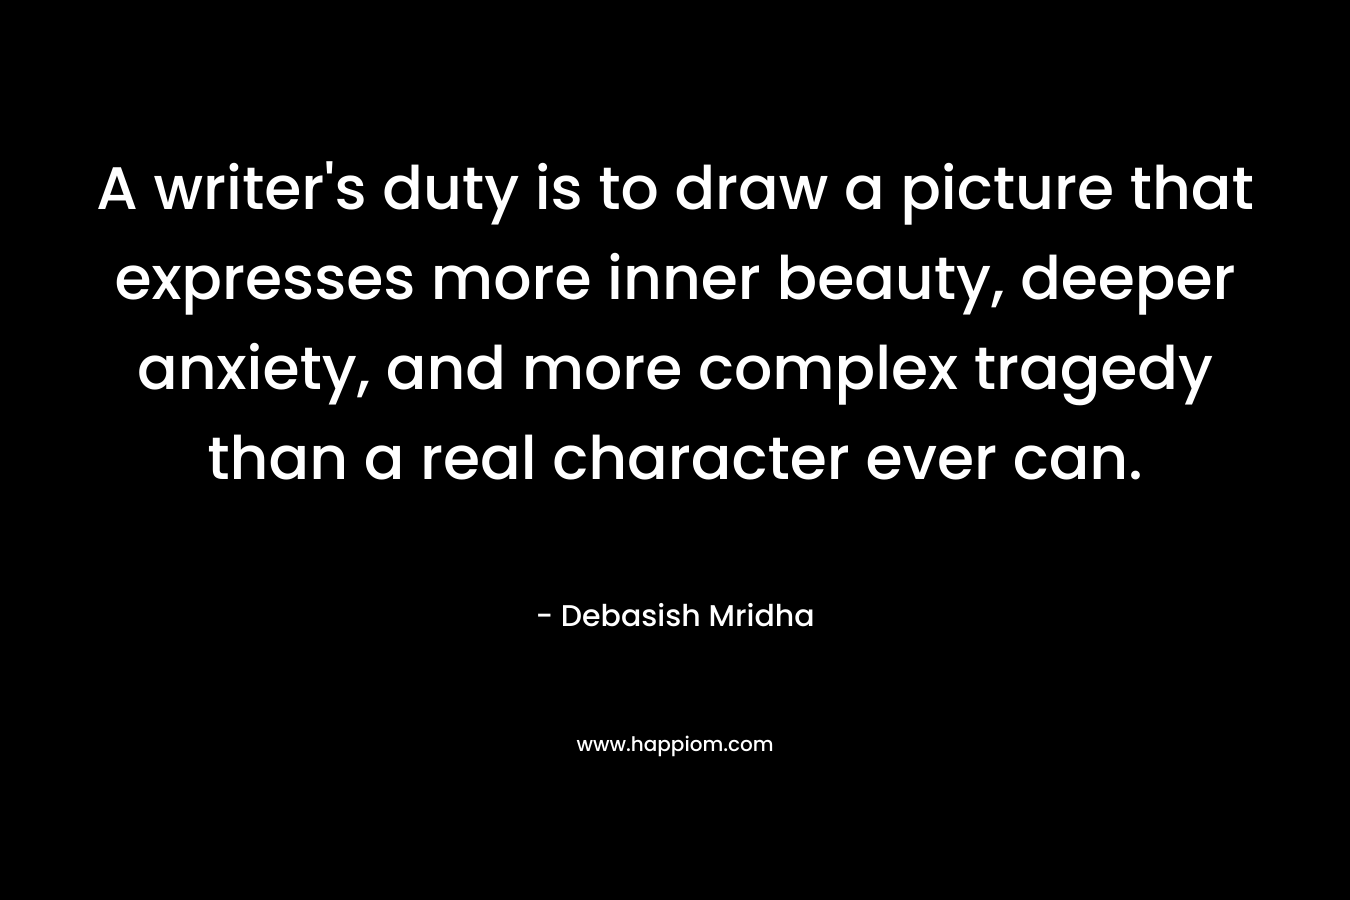 A writer’s duty is to draw a picture that expresses more inner beauty, deeper anxiety, and more complex tragedy than a real character ever can. – Debasish Mridha